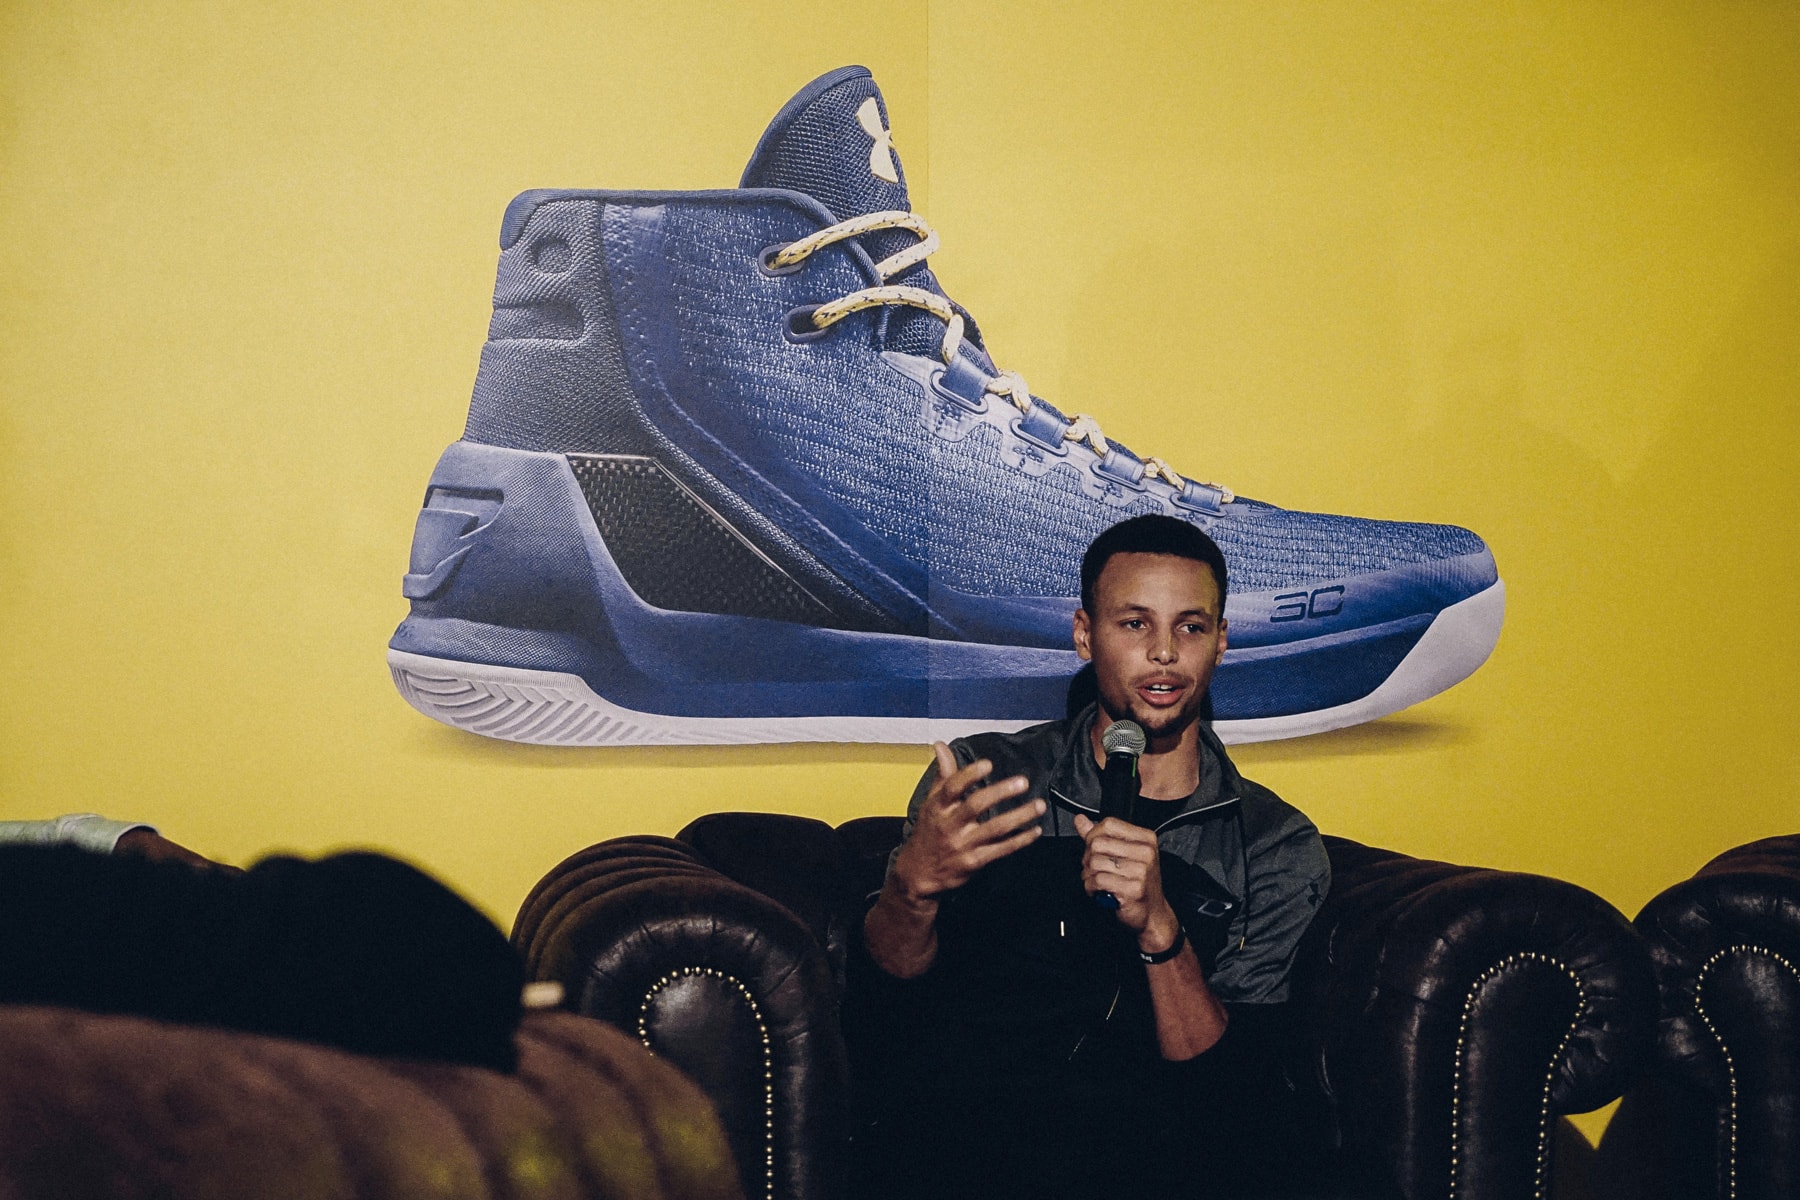 Under Armor unveils the Curry 5 on Warriors star's birthday